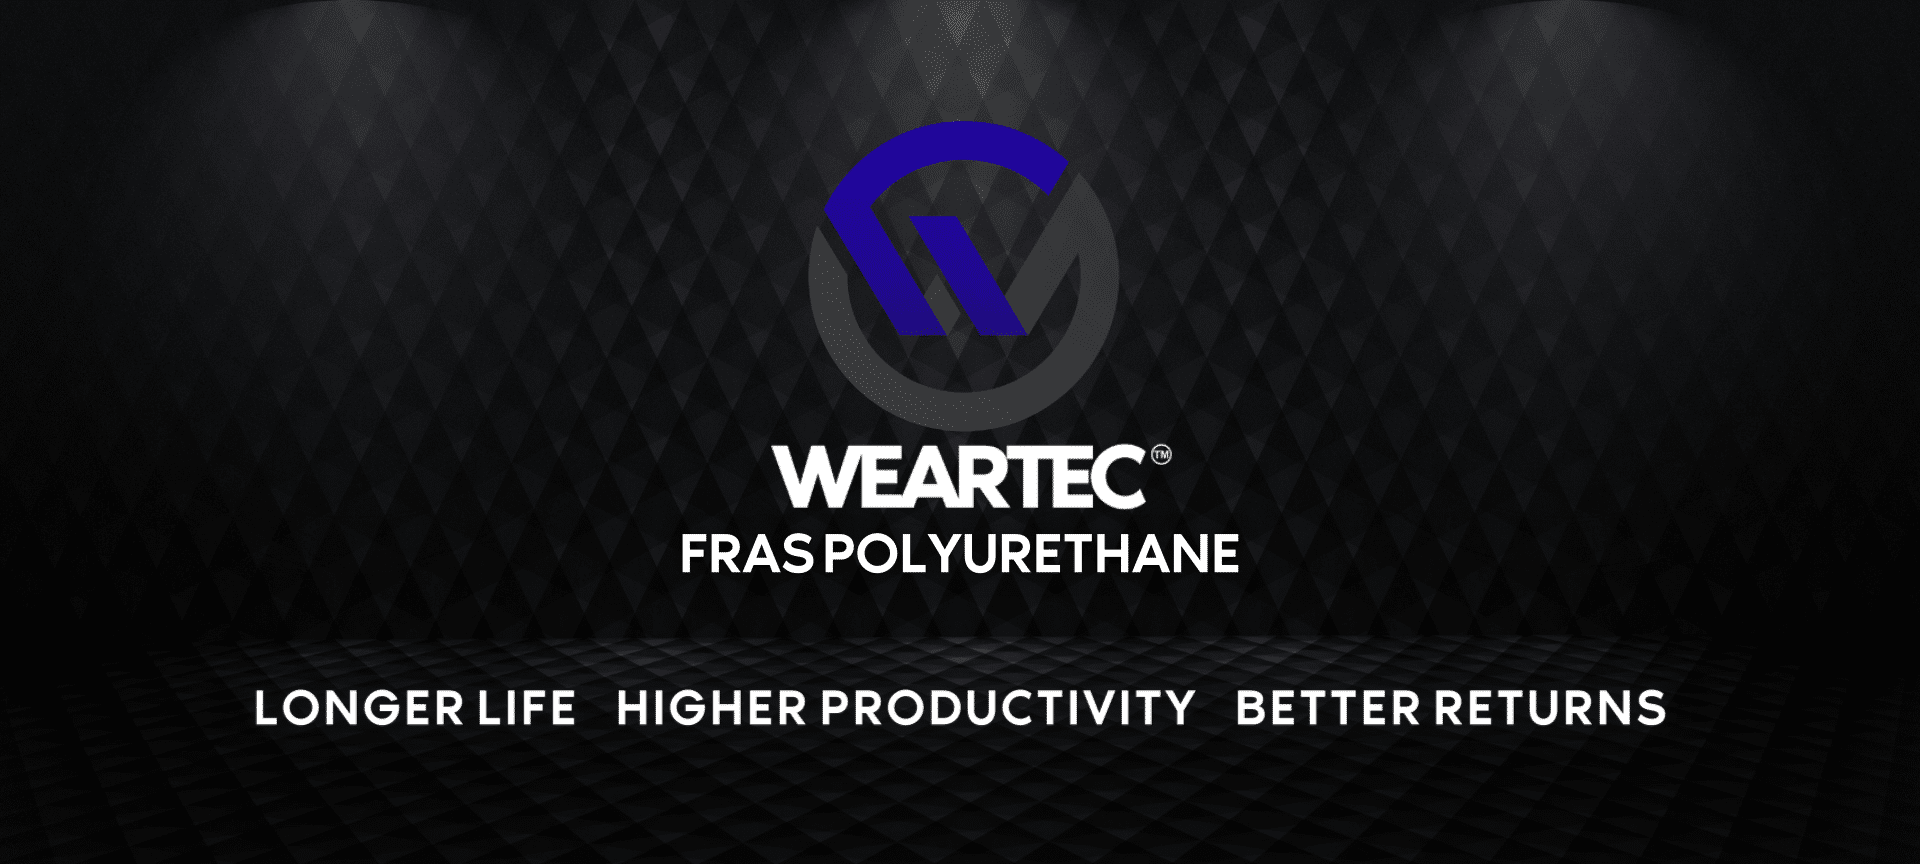 Weartec Home Page.